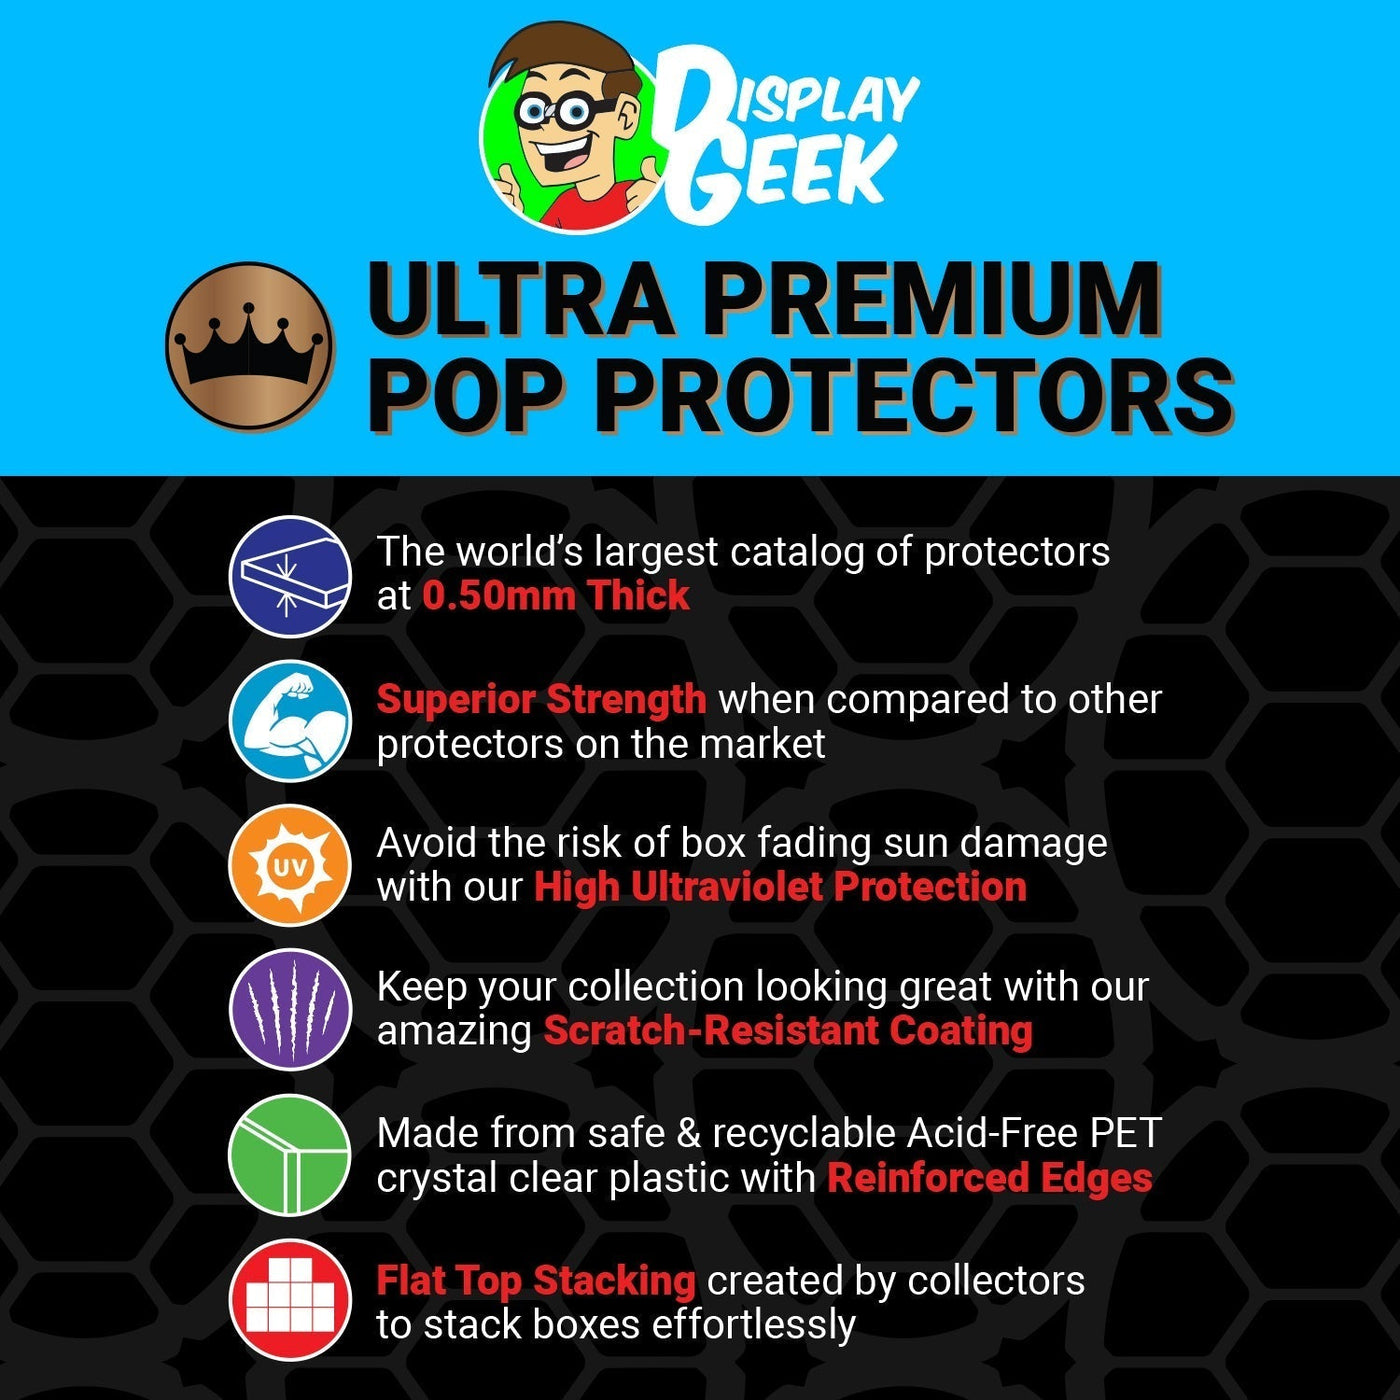 Pop Protector for 2 Pack Vampire Buffy and Vampire Angel SDCC Funko Pop on The Protector Guide App by Display Geek